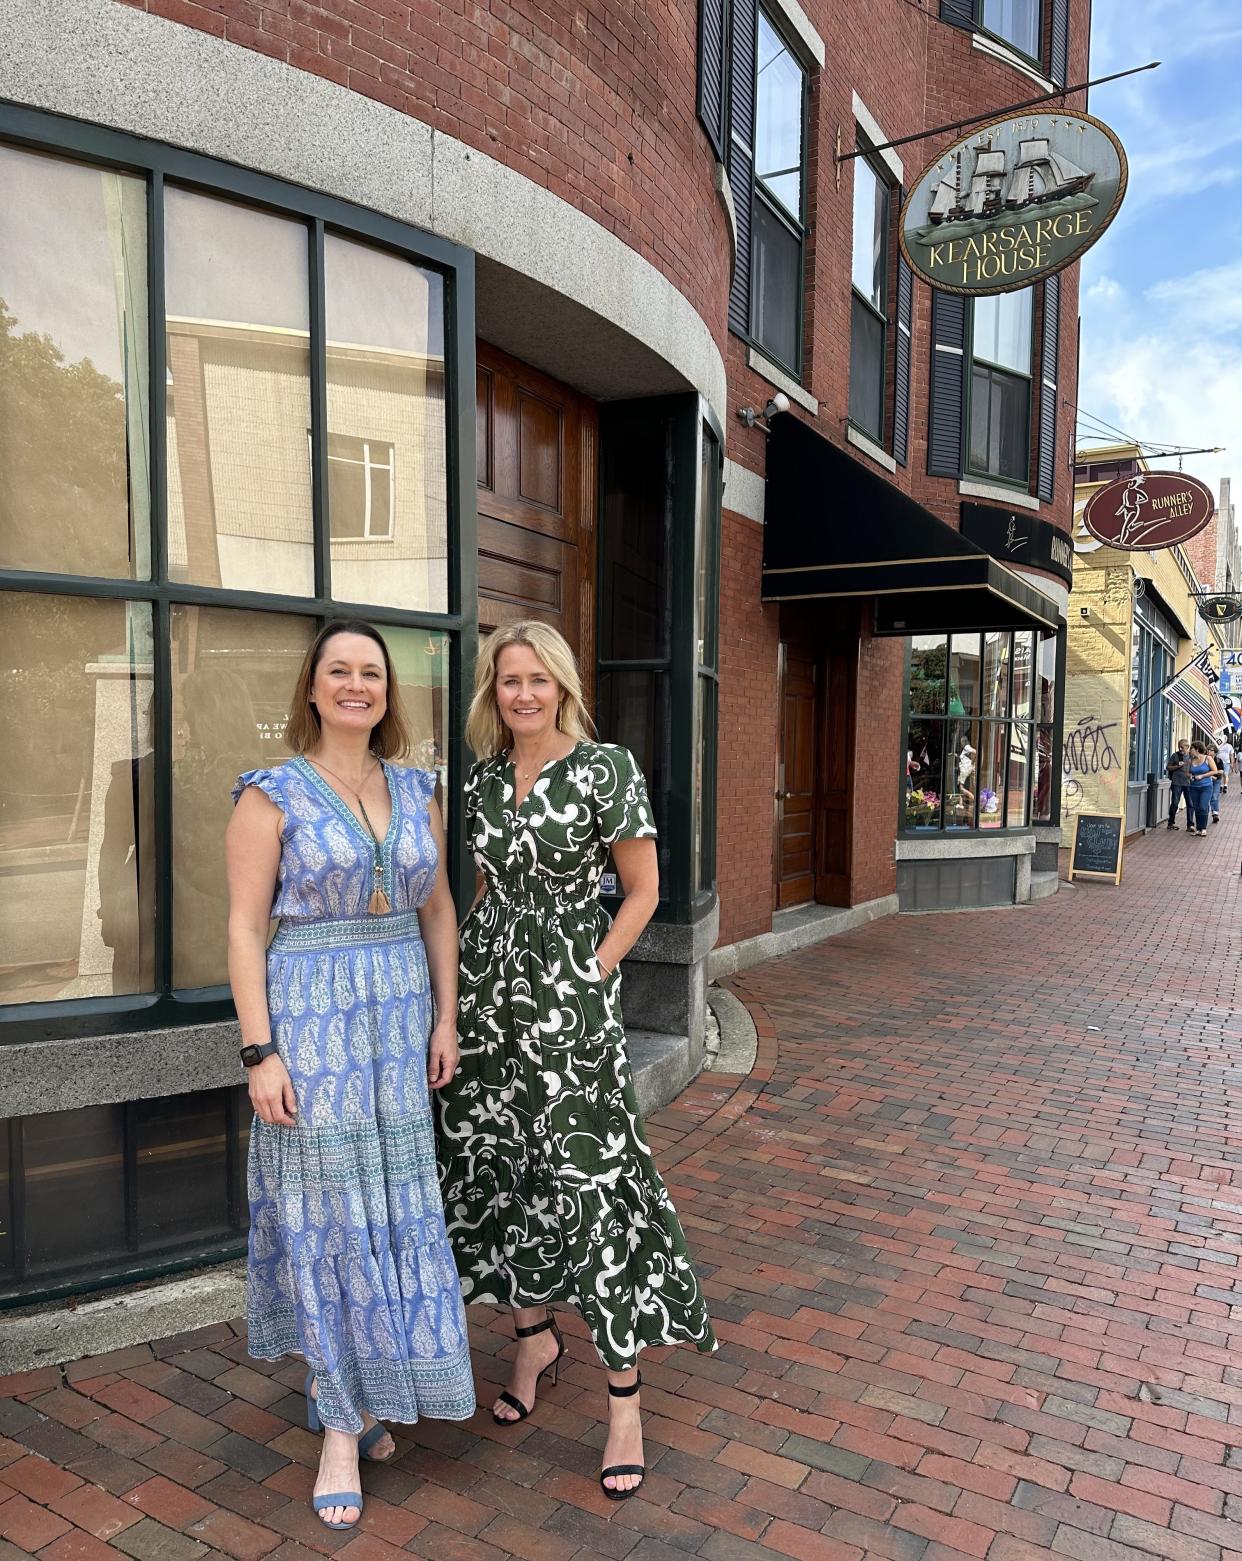 Music Hall Executive Director Tina Sawtelle and Director of Institutional Advancement Mary Beth Johnson are seen at the entrance of the upcoming Ticketing Hub and Members Club under construction at the Kearsarge Building on Congress Street in Portsmouth.